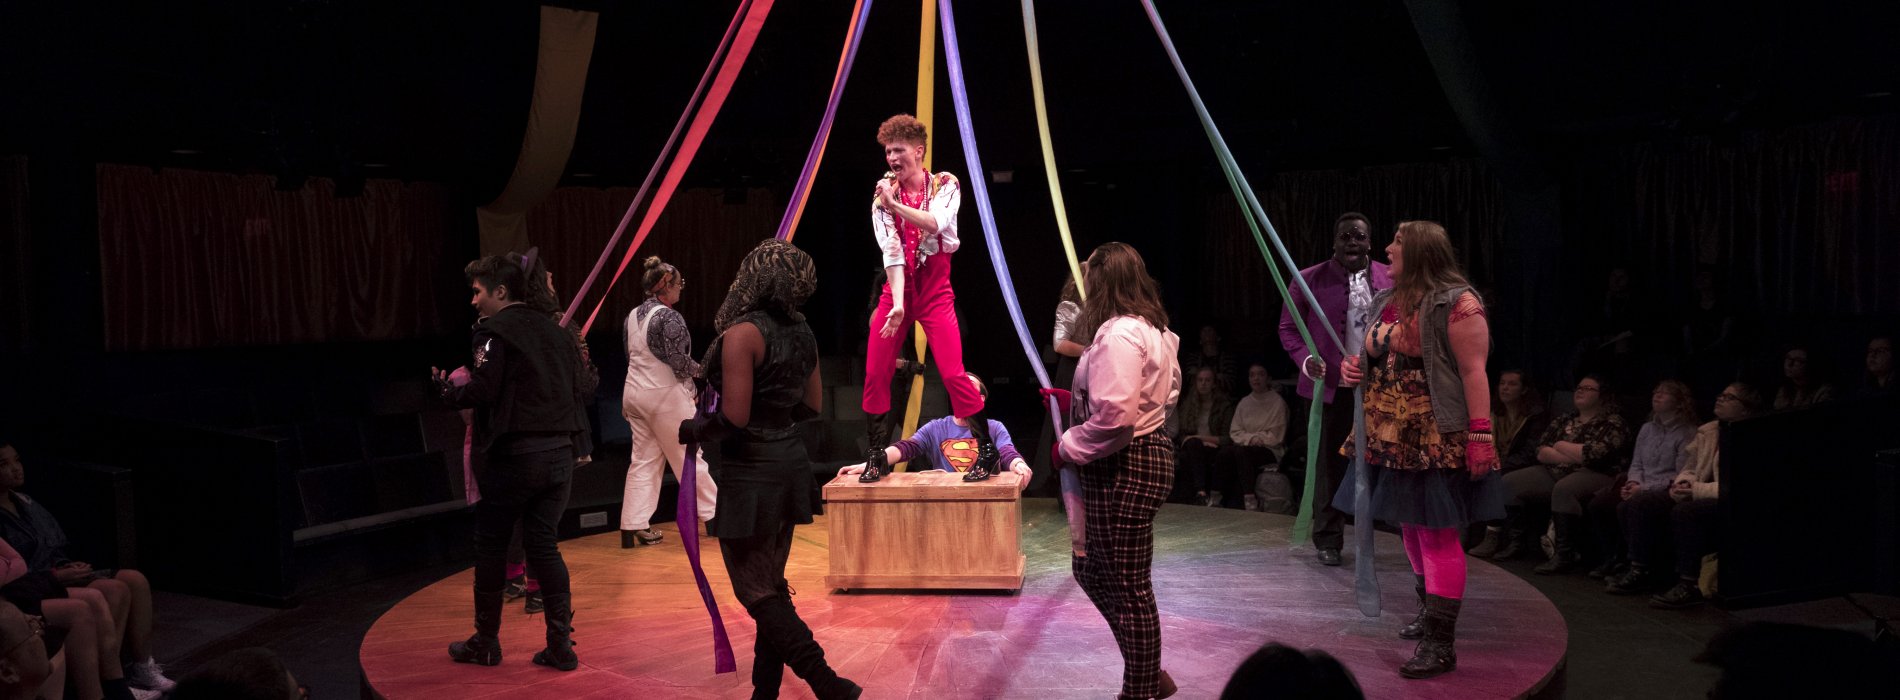 The UAlbany Theater Department production of Godspell on October 18, 2018 at the Performing Arts Center's Arena Theater. (photo by Patrick Dodson)